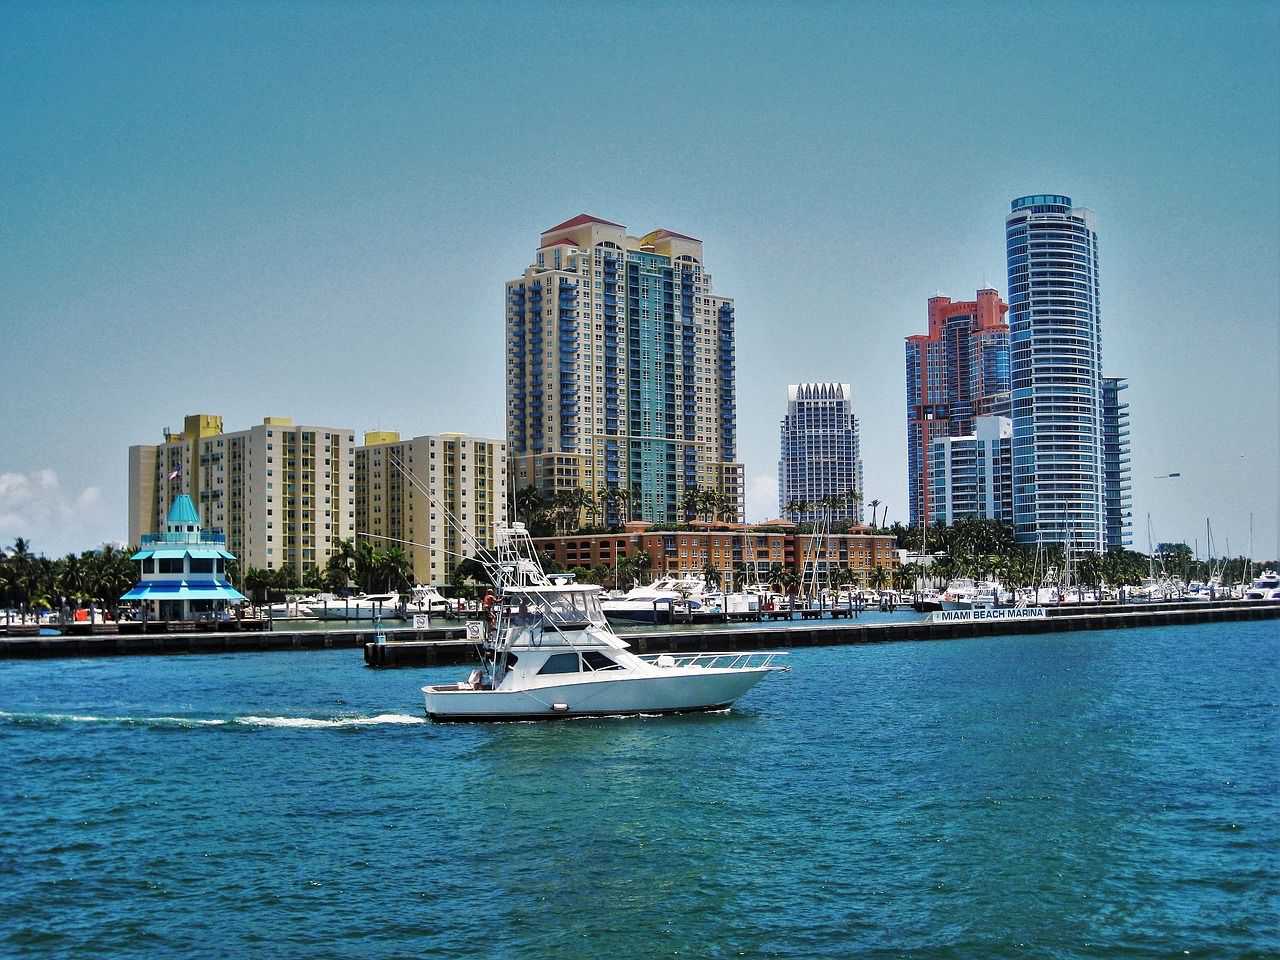 What is there to see and do in Miami, Florida